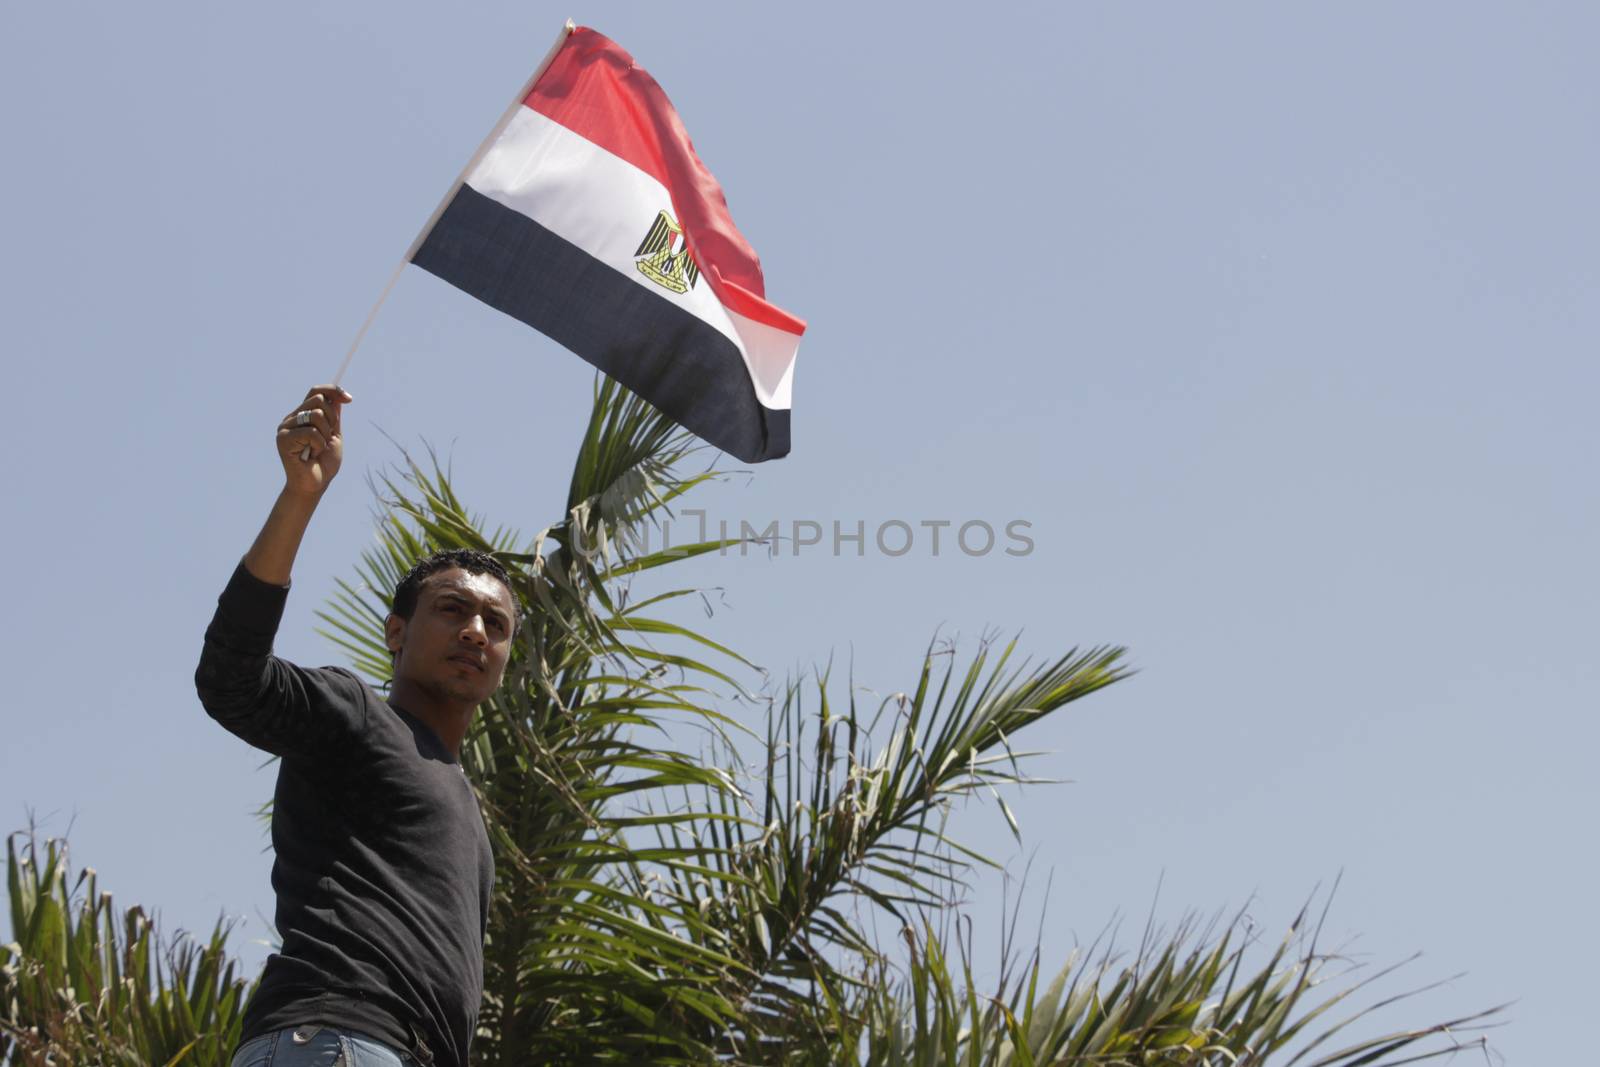 EGYPT, Giza: A man waves national flag as dozens hold portraits of Egyptian president Abdel-Fattah el-Sissi reading Long live Egypt and gather in Mostafa Mahmoud Square in Giza, near Cairo on April 25, 2016 to commemorate the thirty-fourth anniversary of Sinai liberation. This same day, thousands of security personnel were deployed around Cairo ahead of mass planned protests over the return of two Red Sea islands to Saudi Arabia, a decision that has provoked some of the most open criticism of President Abdel-Fattah el-Sissi's leadership.